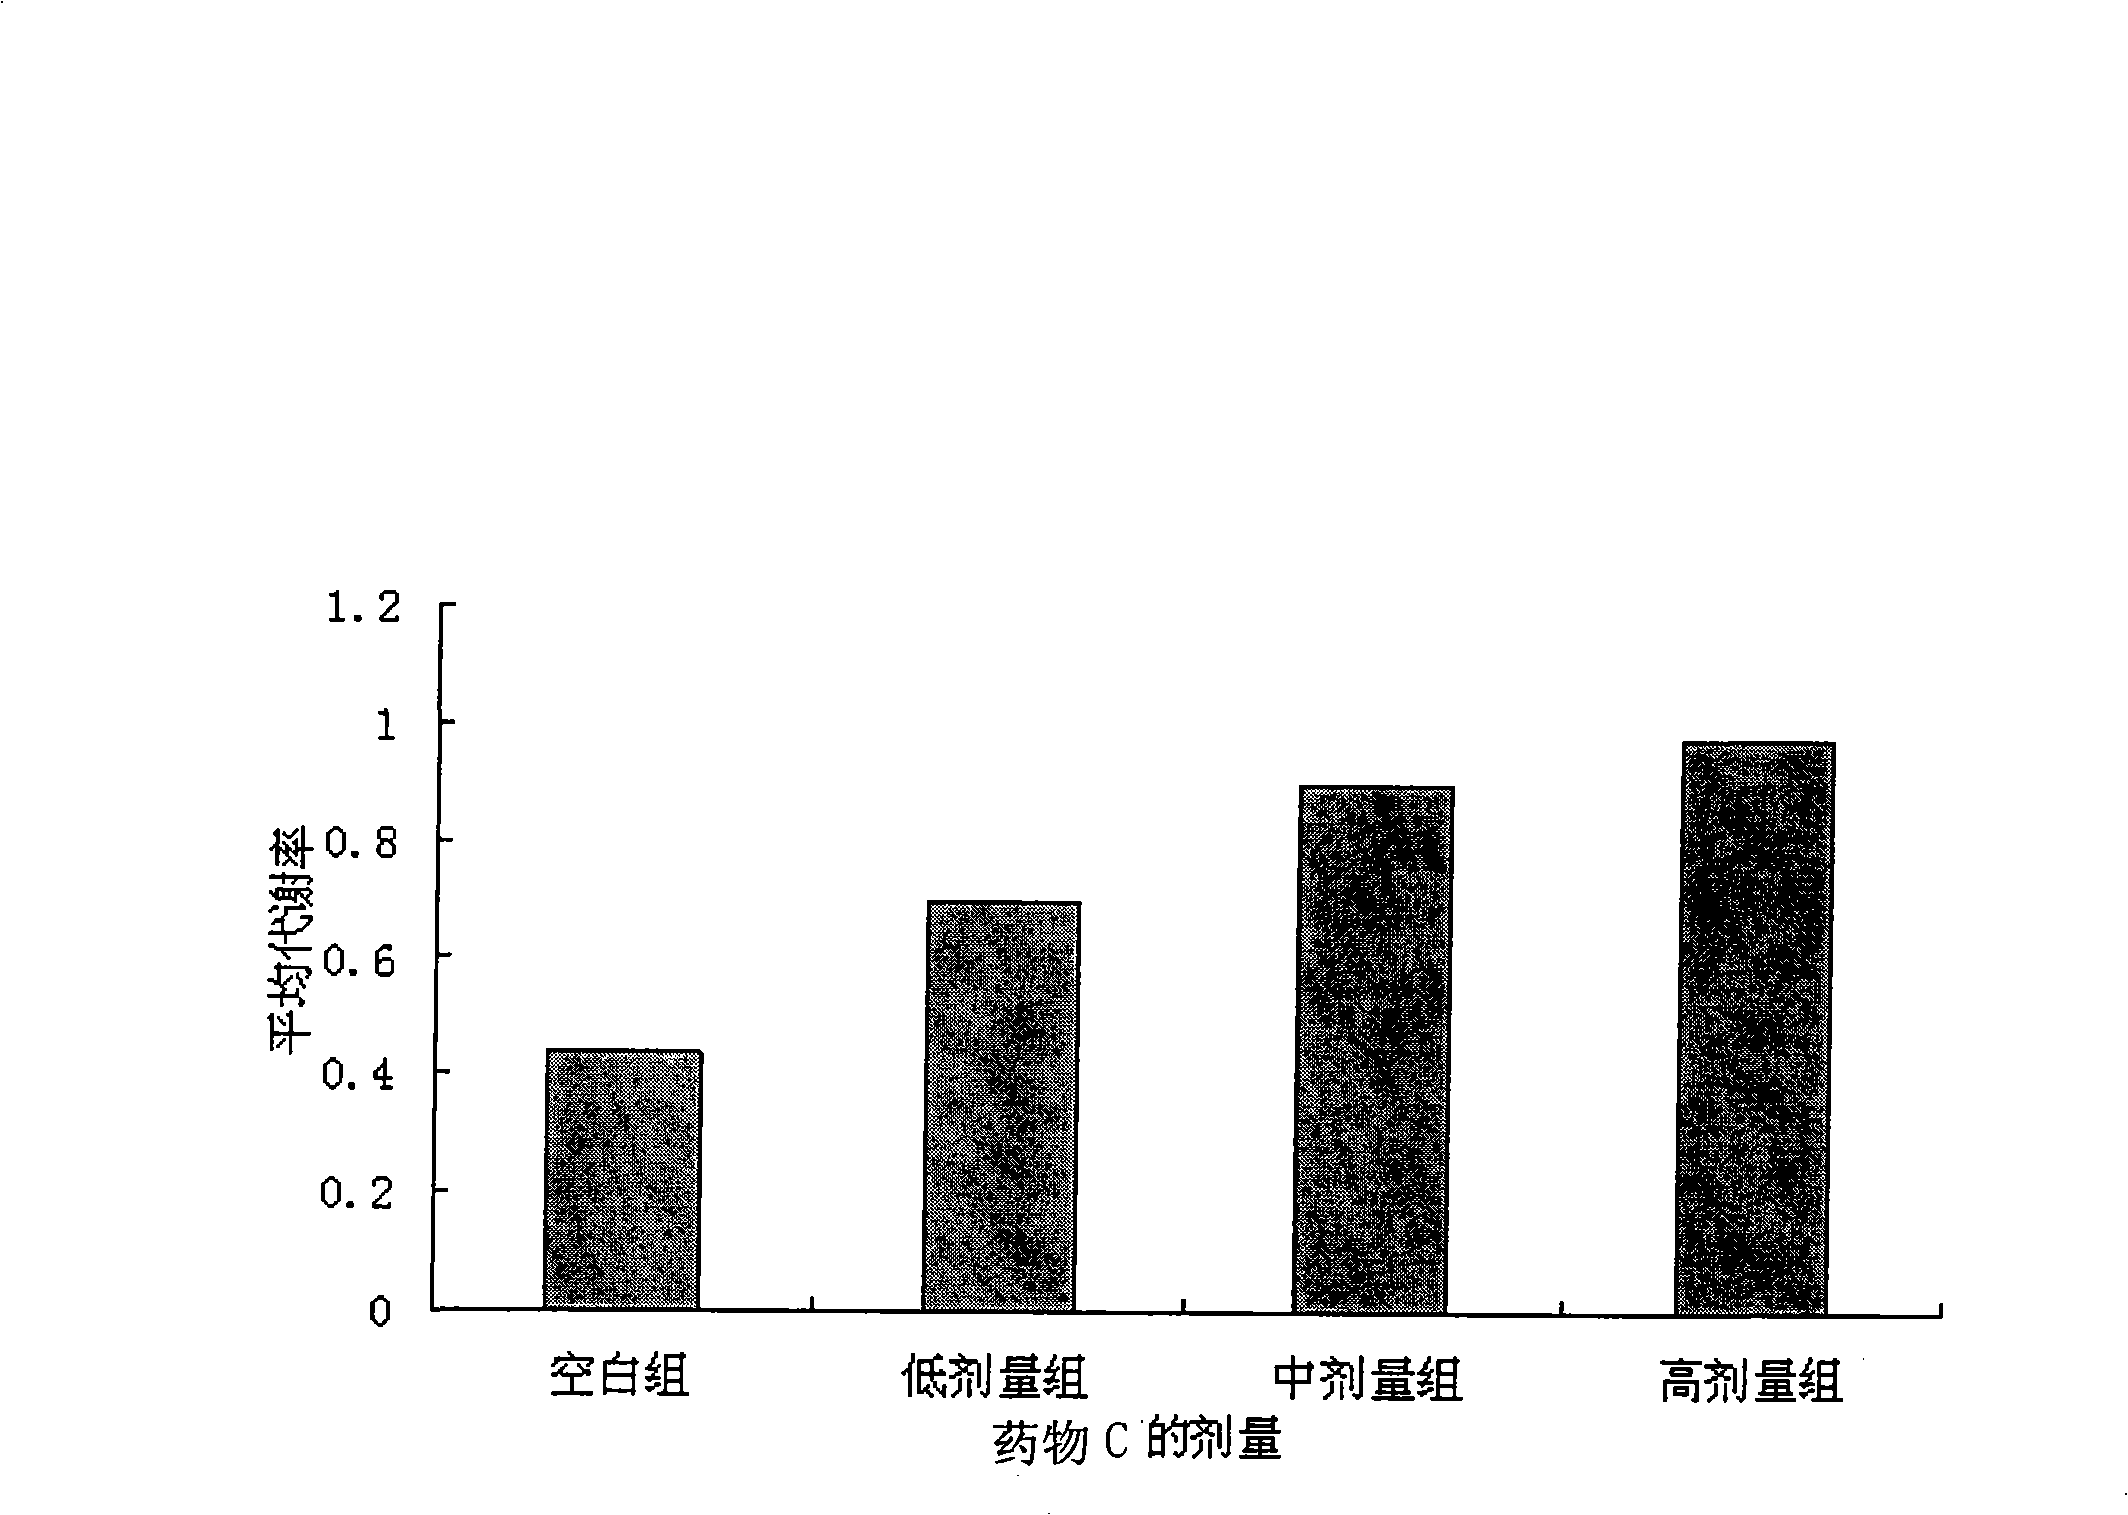 Method for minim hepatic tissue in vitro incubation and detecting CYP450 enzymatic activity